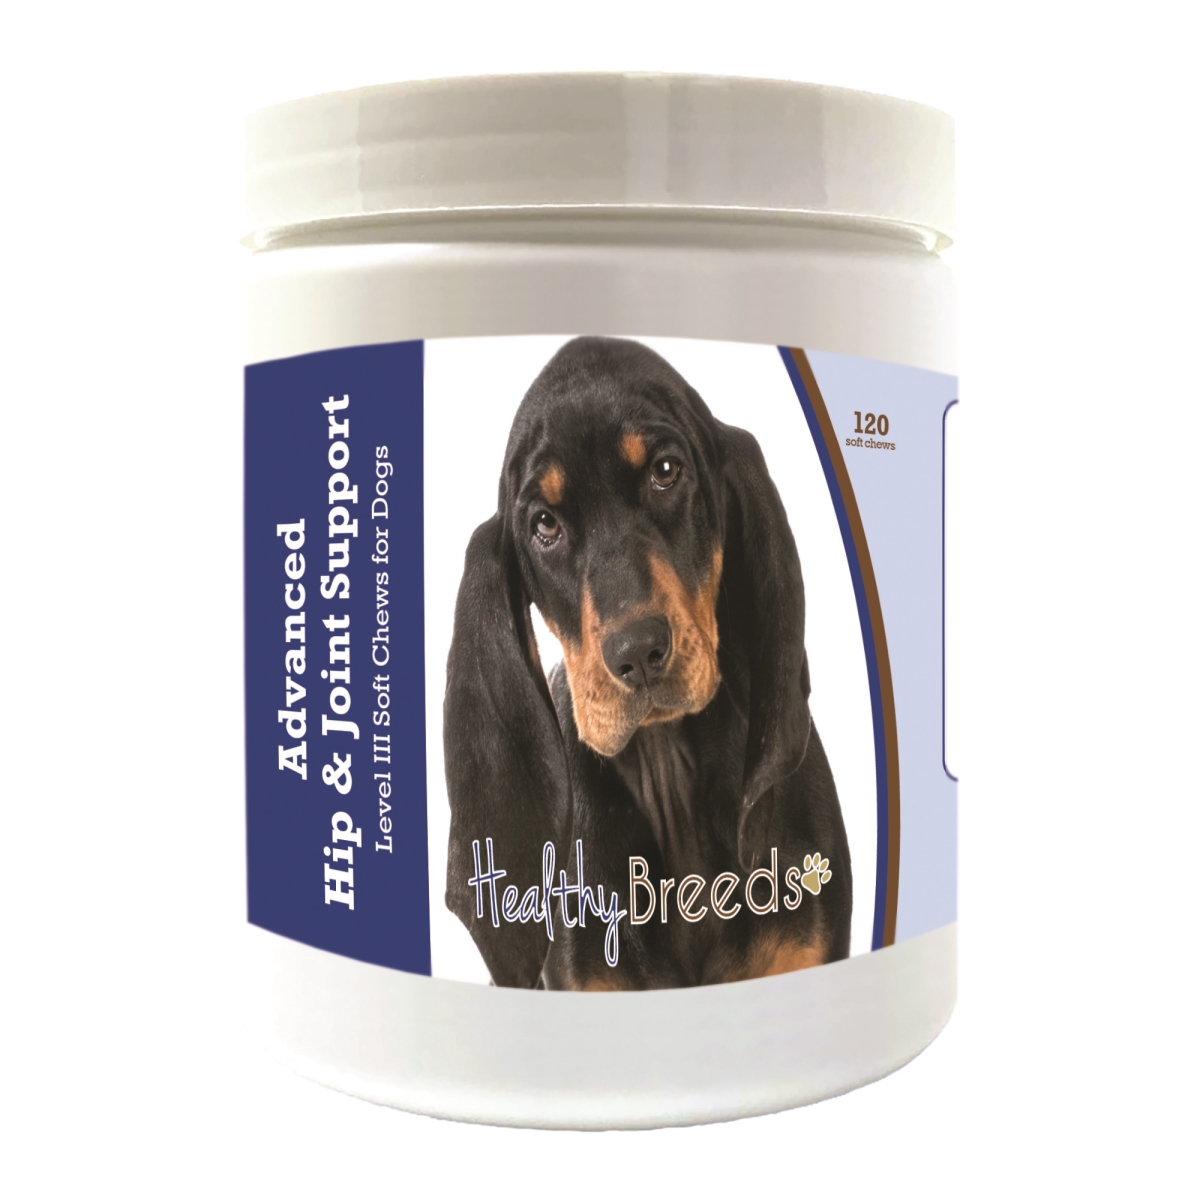 Picture of Healthy Breeds 192959897807 Black & Tan Coonhound Advanced Hip & Joint Support Level III Soft Chews for Dogs